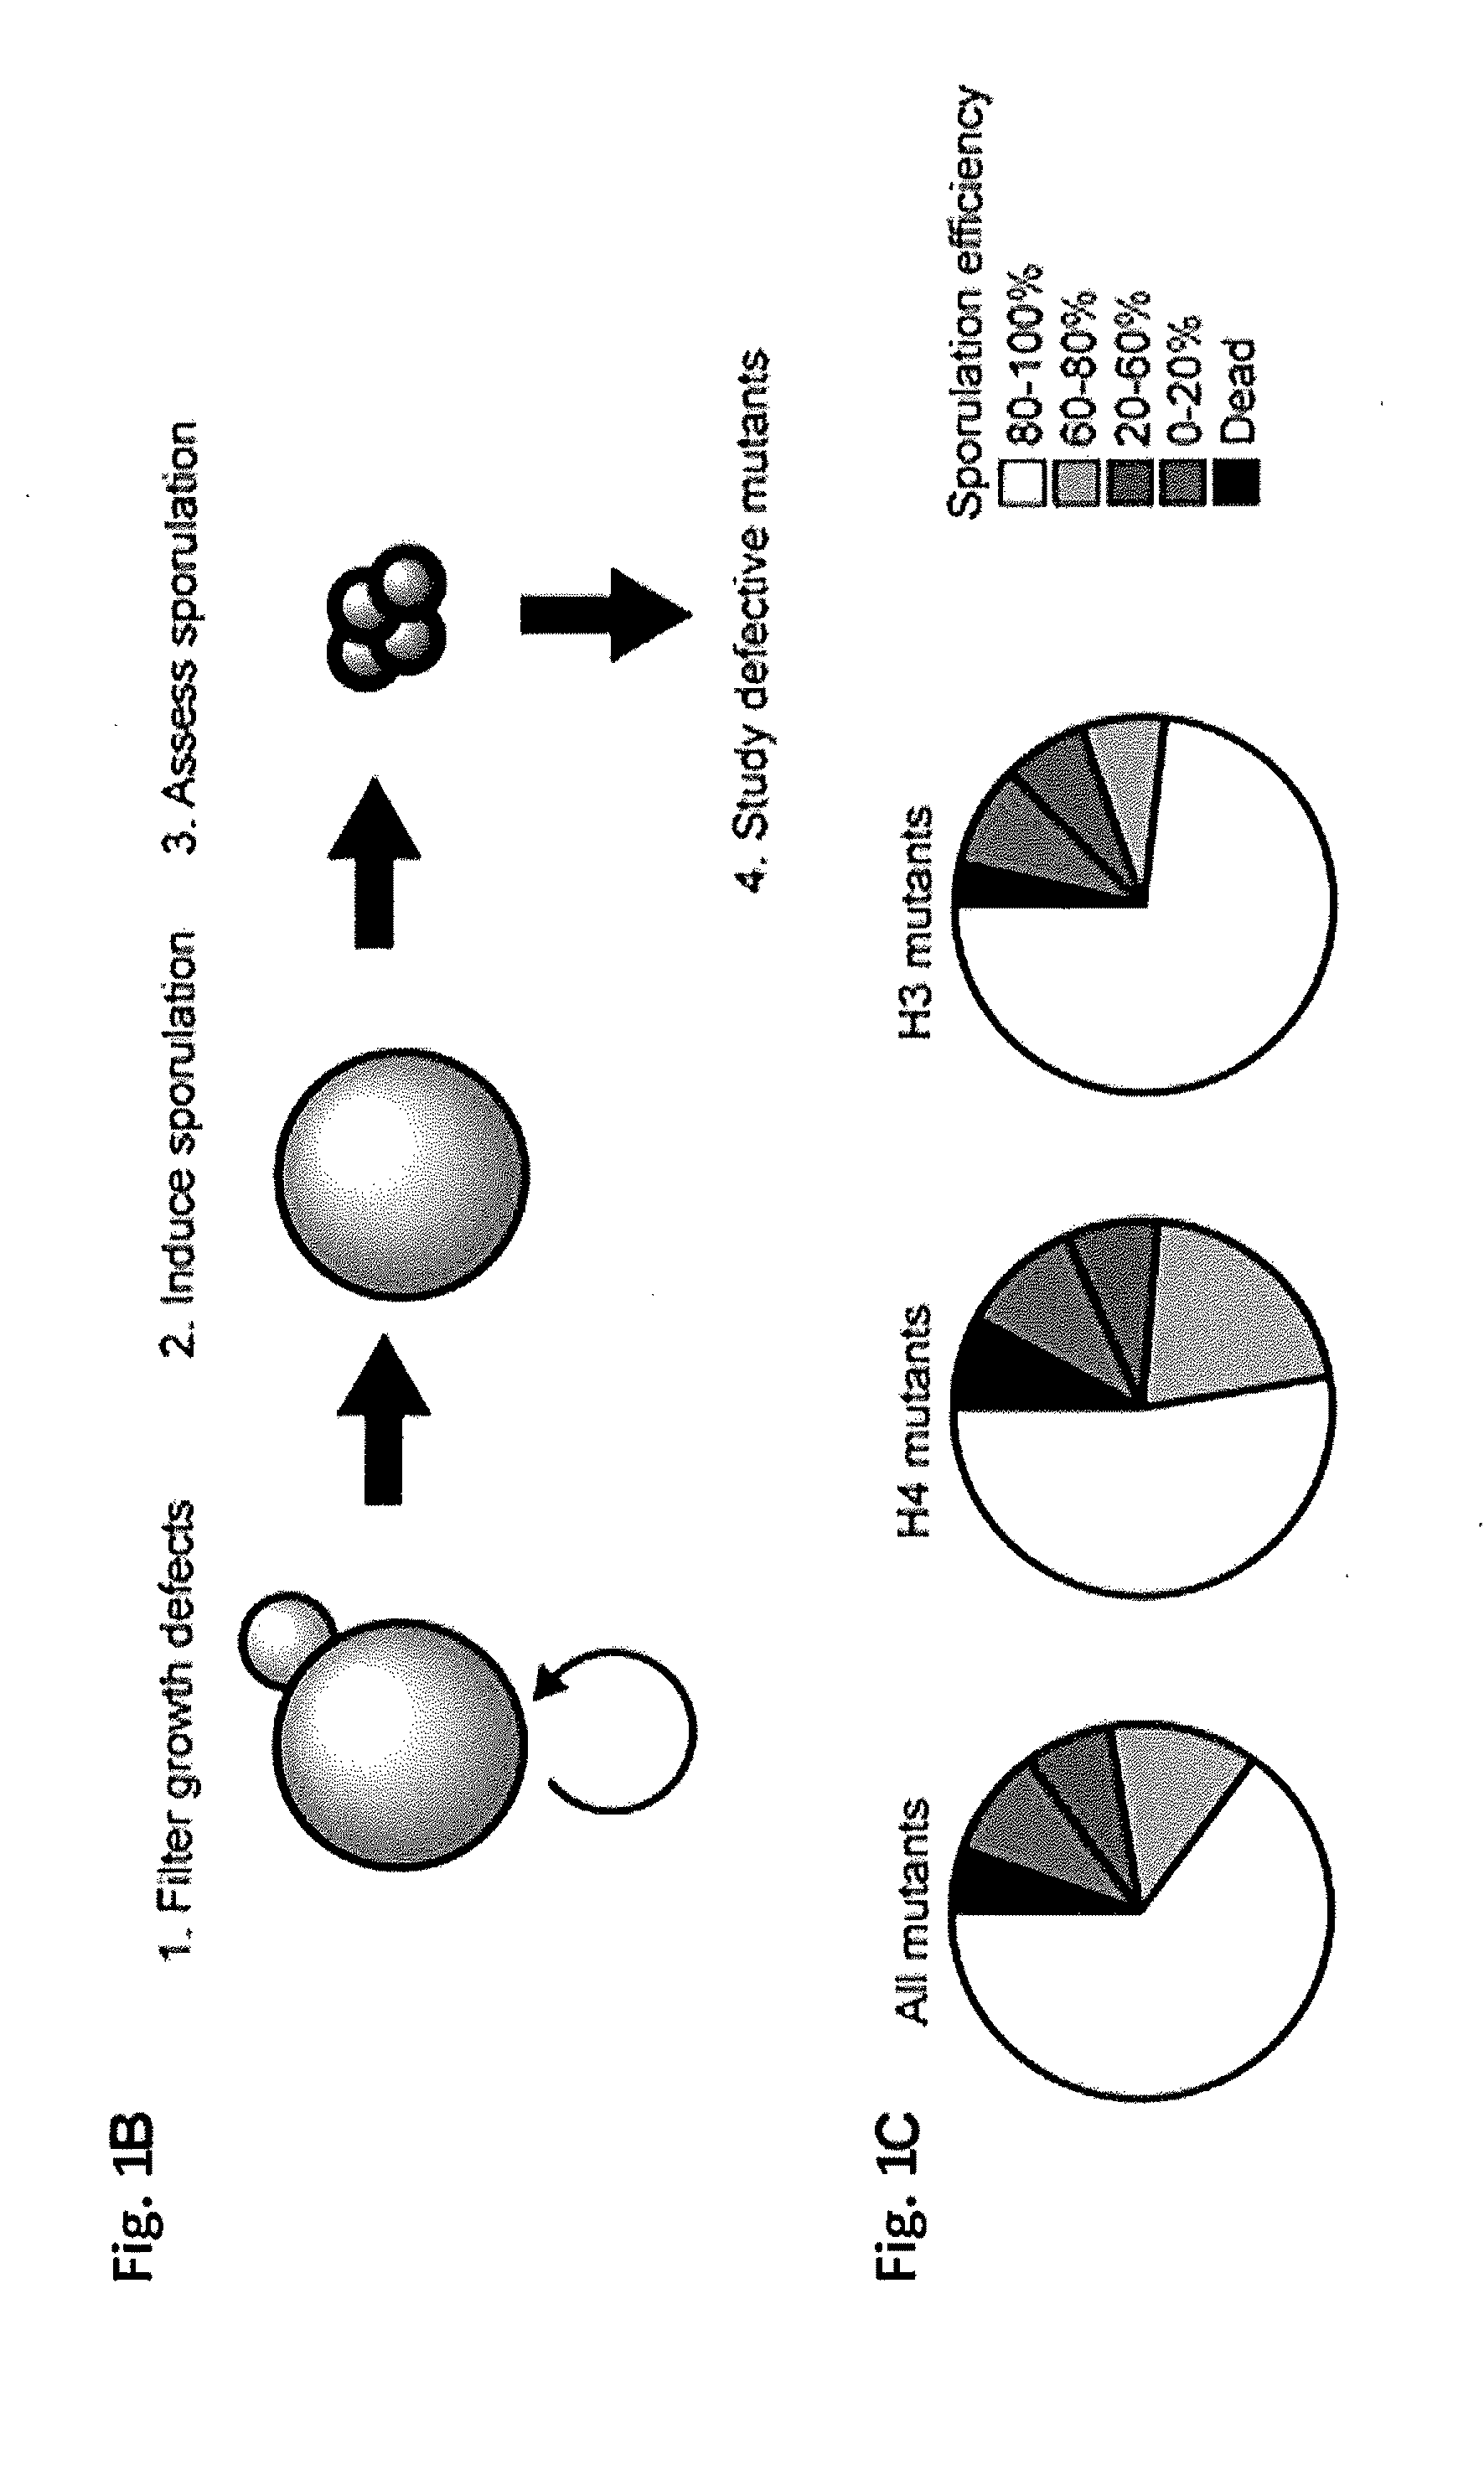 Compositions and Methods for the Identification and Use of Epigenetic Markers Useful in the Study of Normal and Abnormal Mammalian Gametogenesis